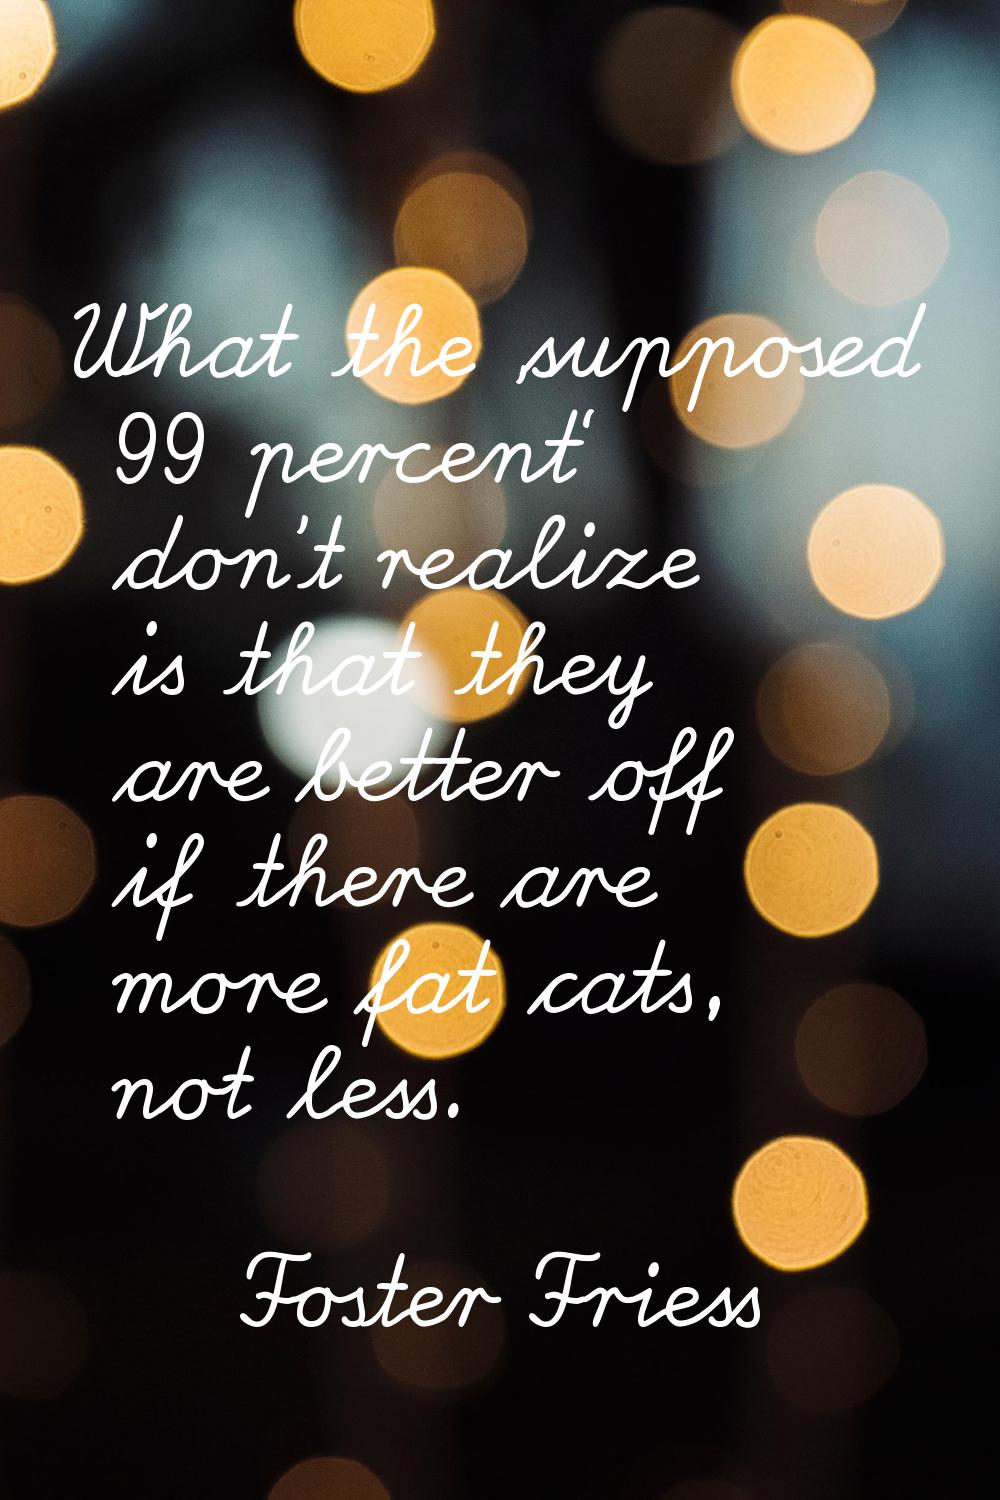 What the 'supposed 99 percent' don't realize is that they are better off if there are more fat cats